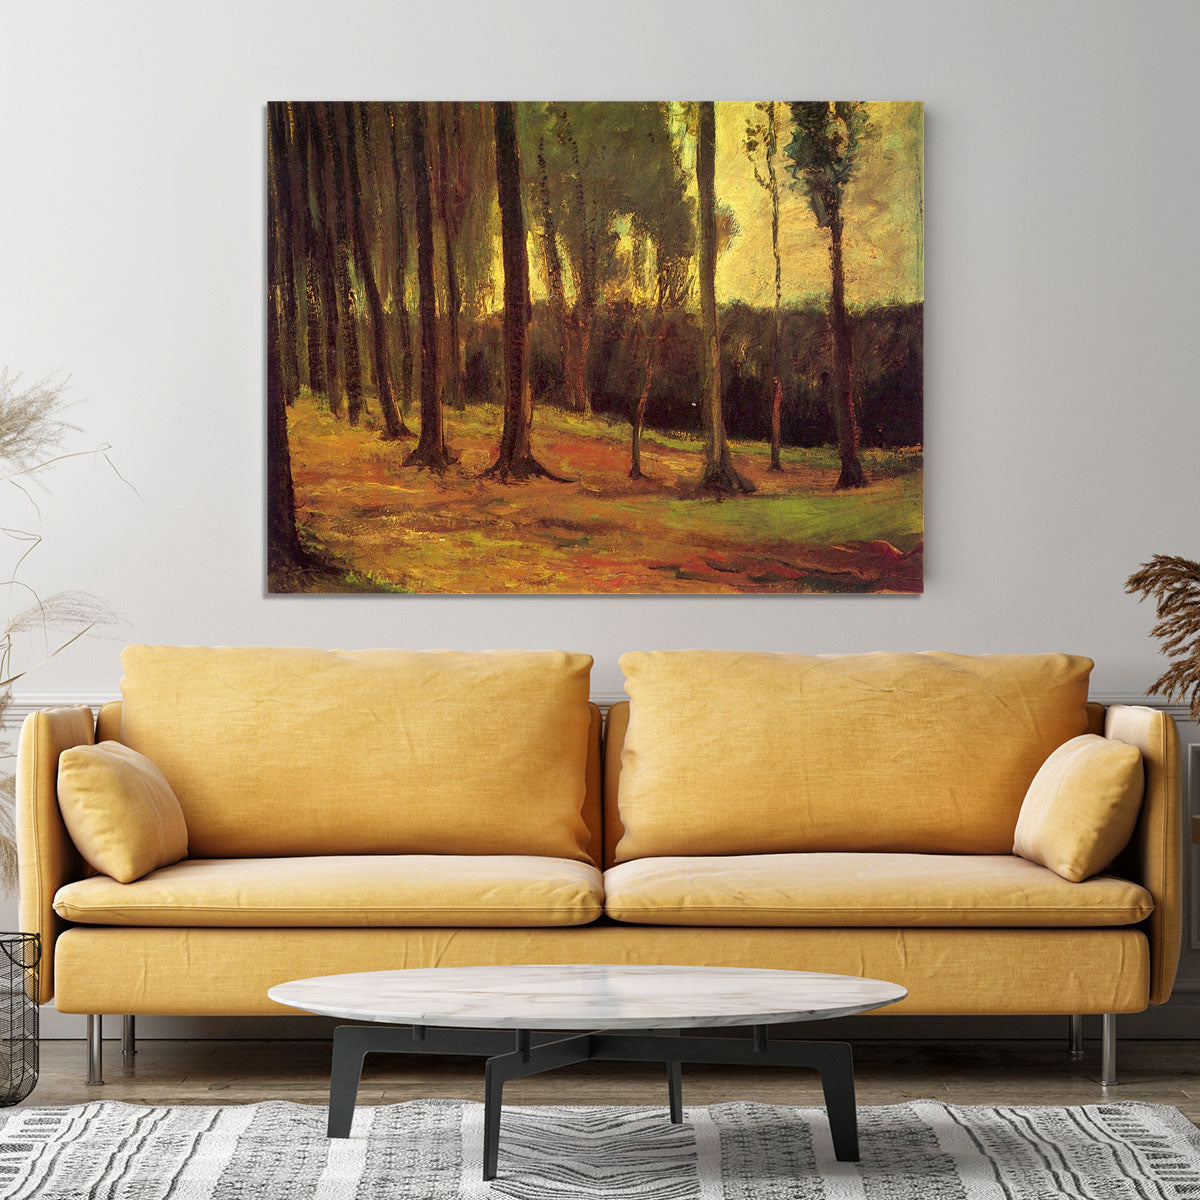 Edge of a Wood by Van Gogh Canvas Print or Poster - Canvas Art Rocks - 4